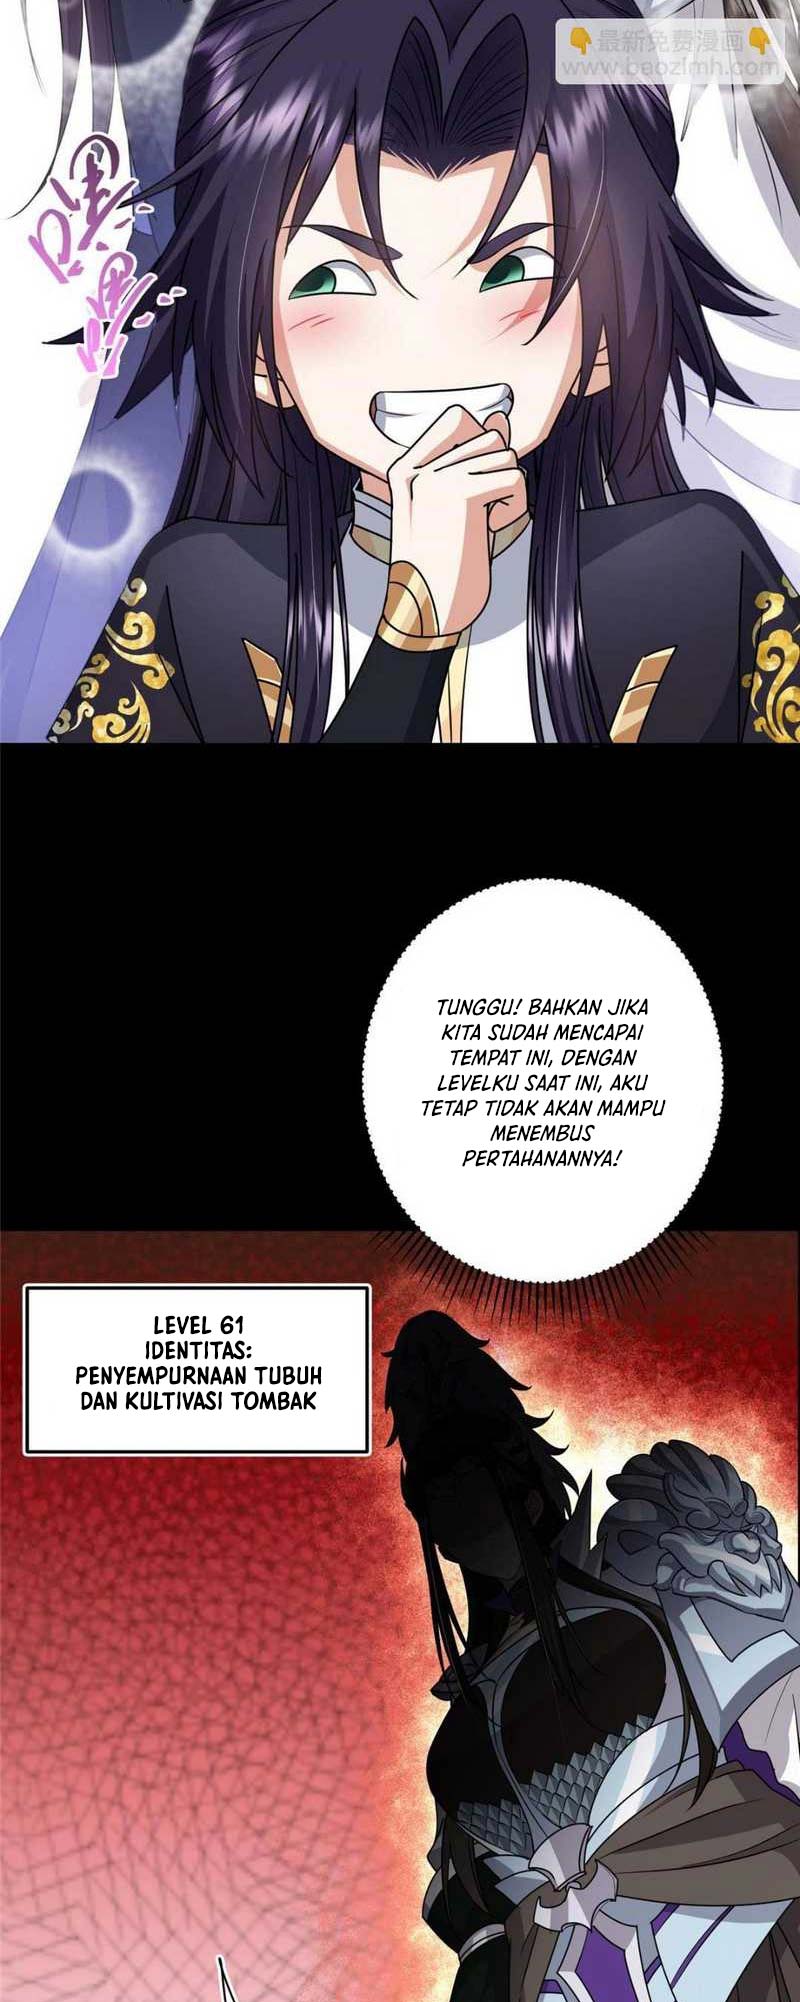 Keep A Low Profile, Sect Leader Chapter 258